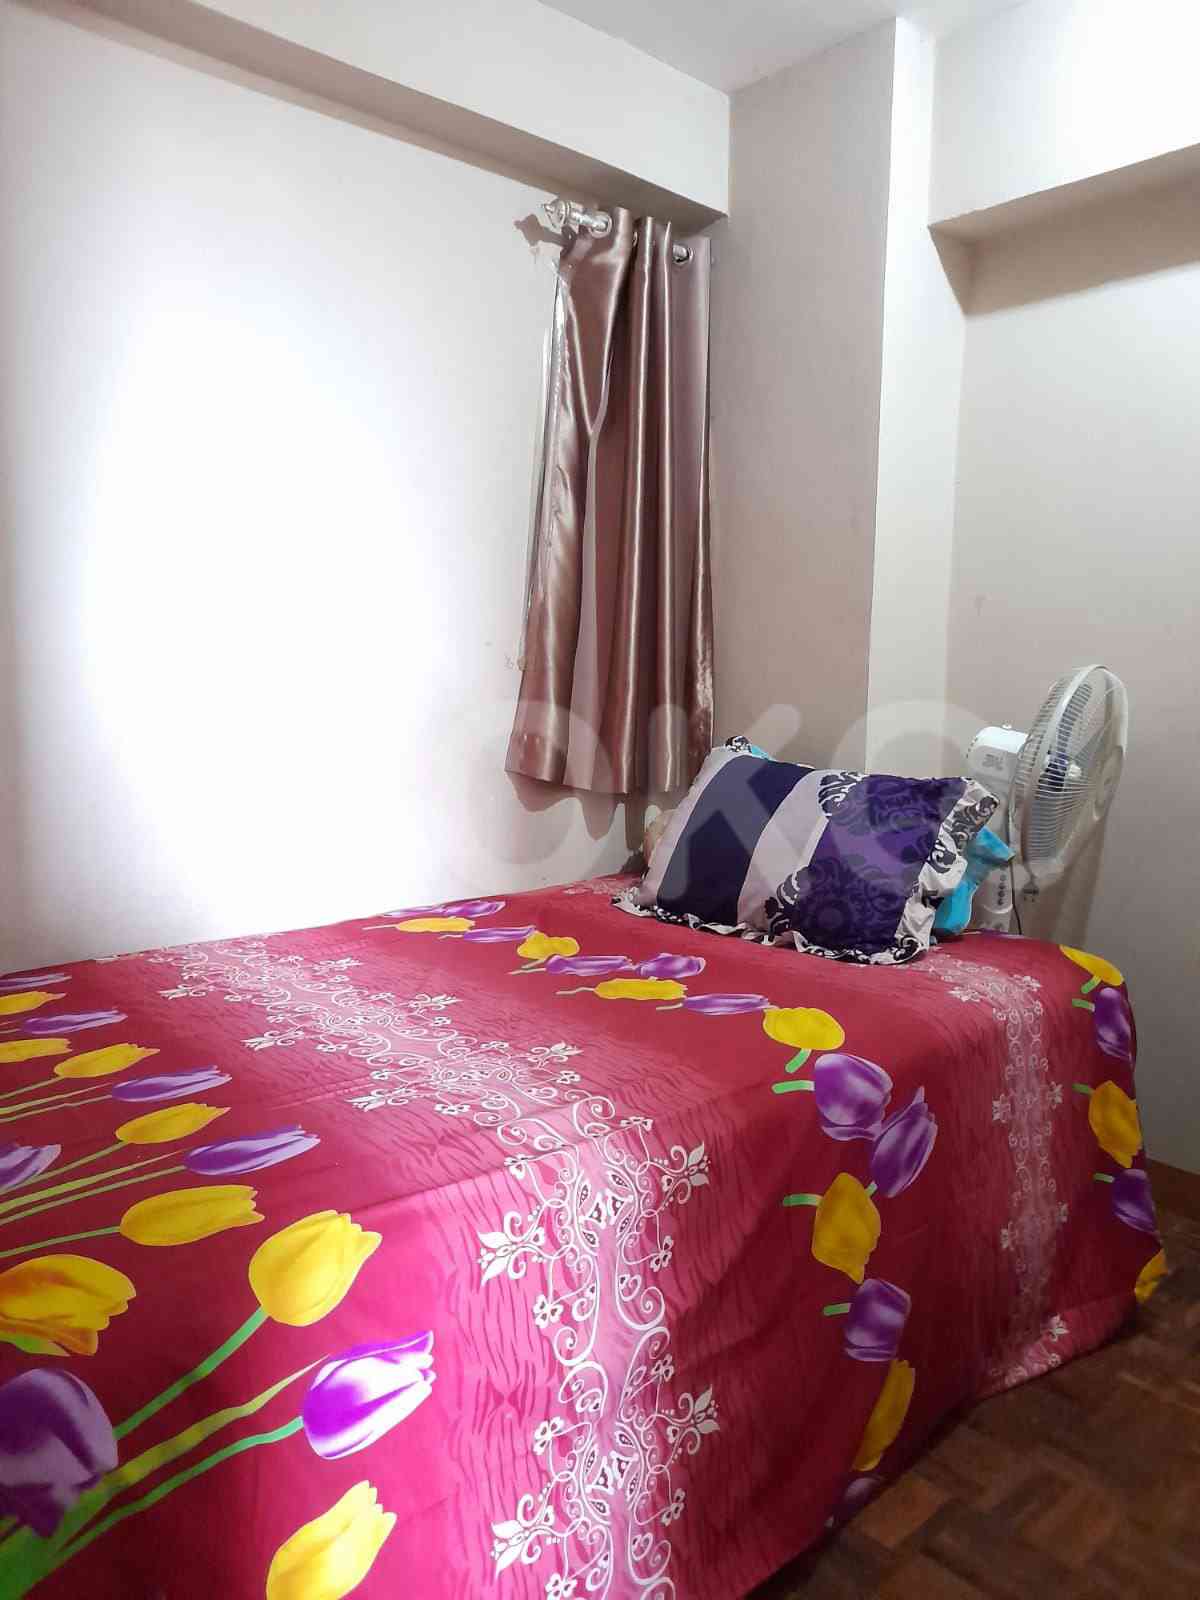 2 Bedroom on 11th Floor for Rent in Sentra Timur Residence - fcaf15 3